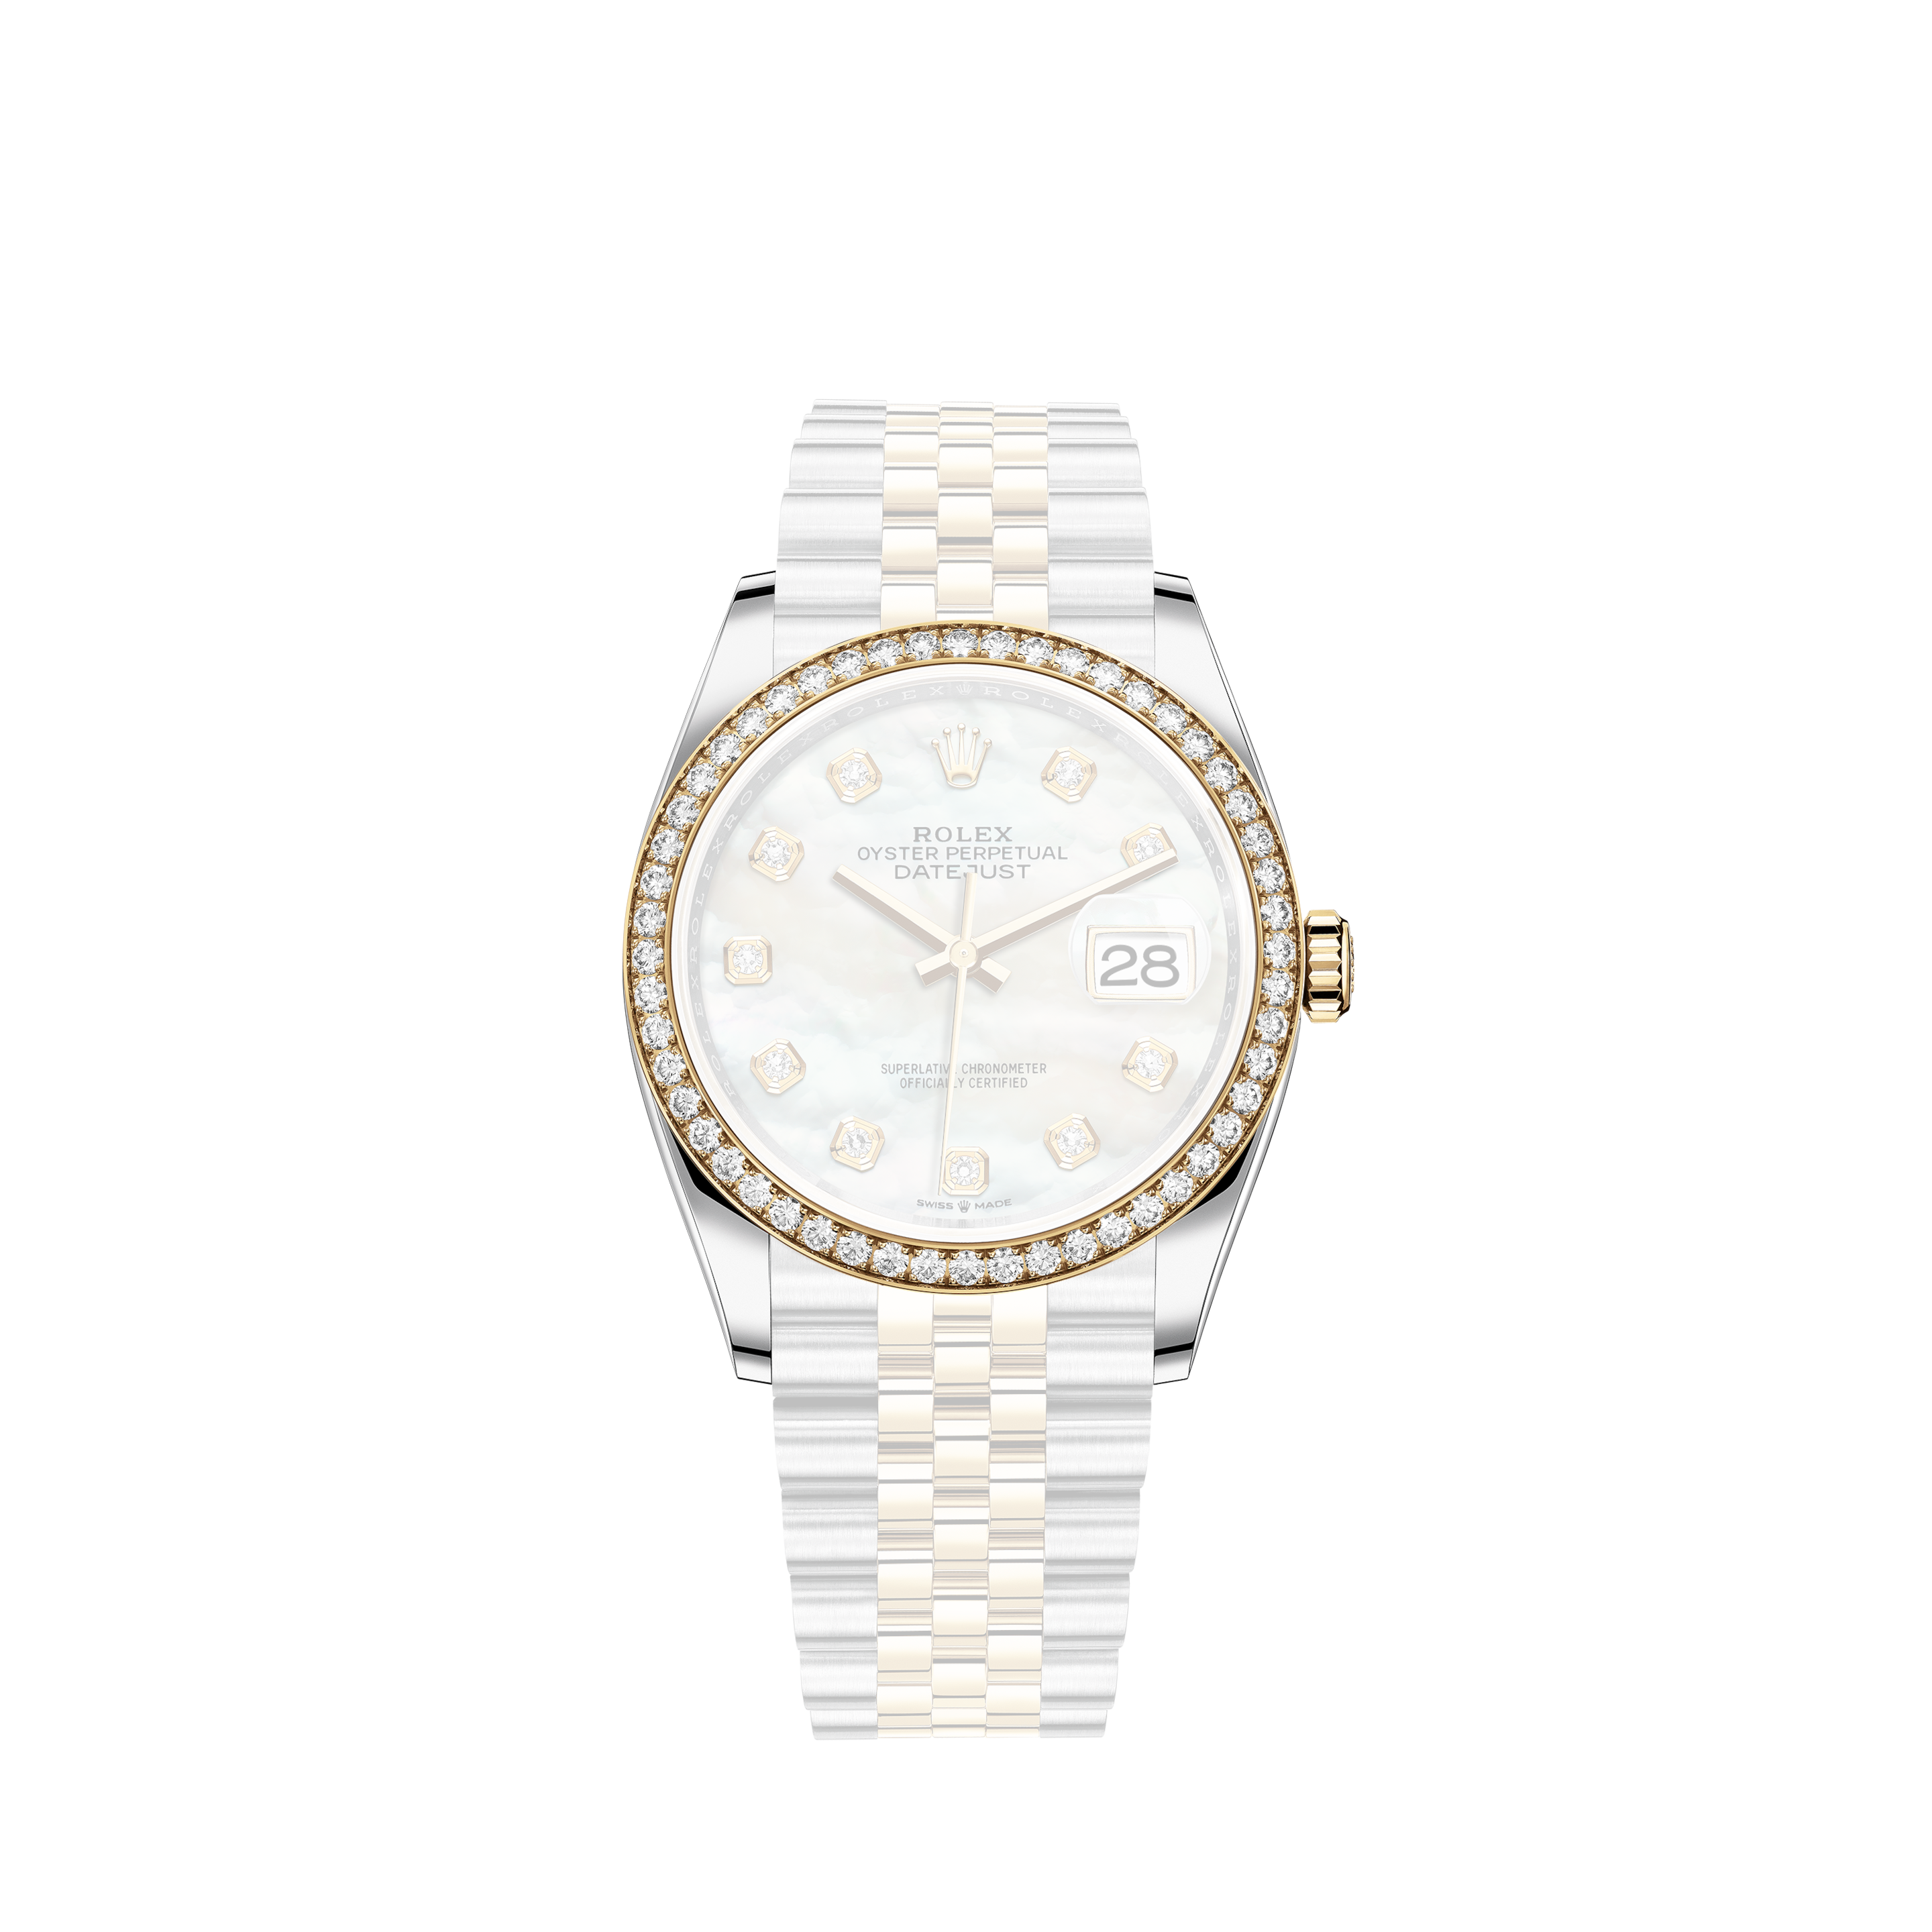 Rolex Datejust 36mm - Steel and White Gold - Diamond Bezel - Jubilee 126284RBR BKIJRolex Datejust 36mm - Steel and White Gold - Diamond Bezel - Oyster 126284RBR BKDO